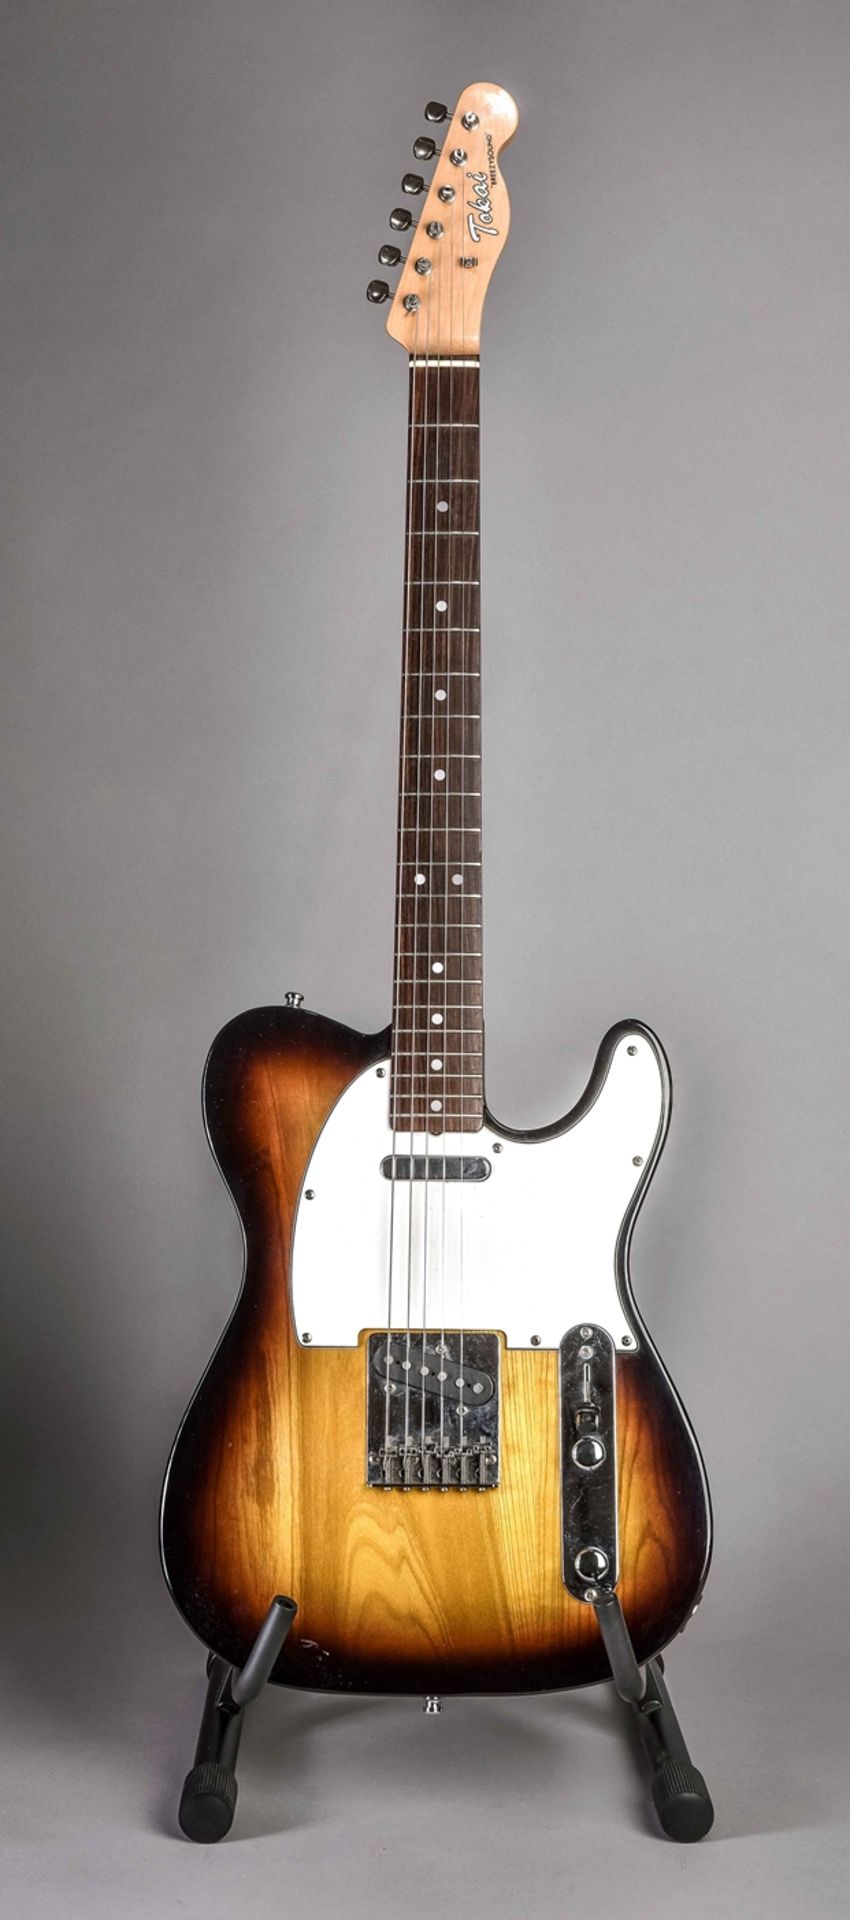 Electric guitar, Tokai "Breezysound" (Tele). Light brown, black rimmed sunburst solid body with whi